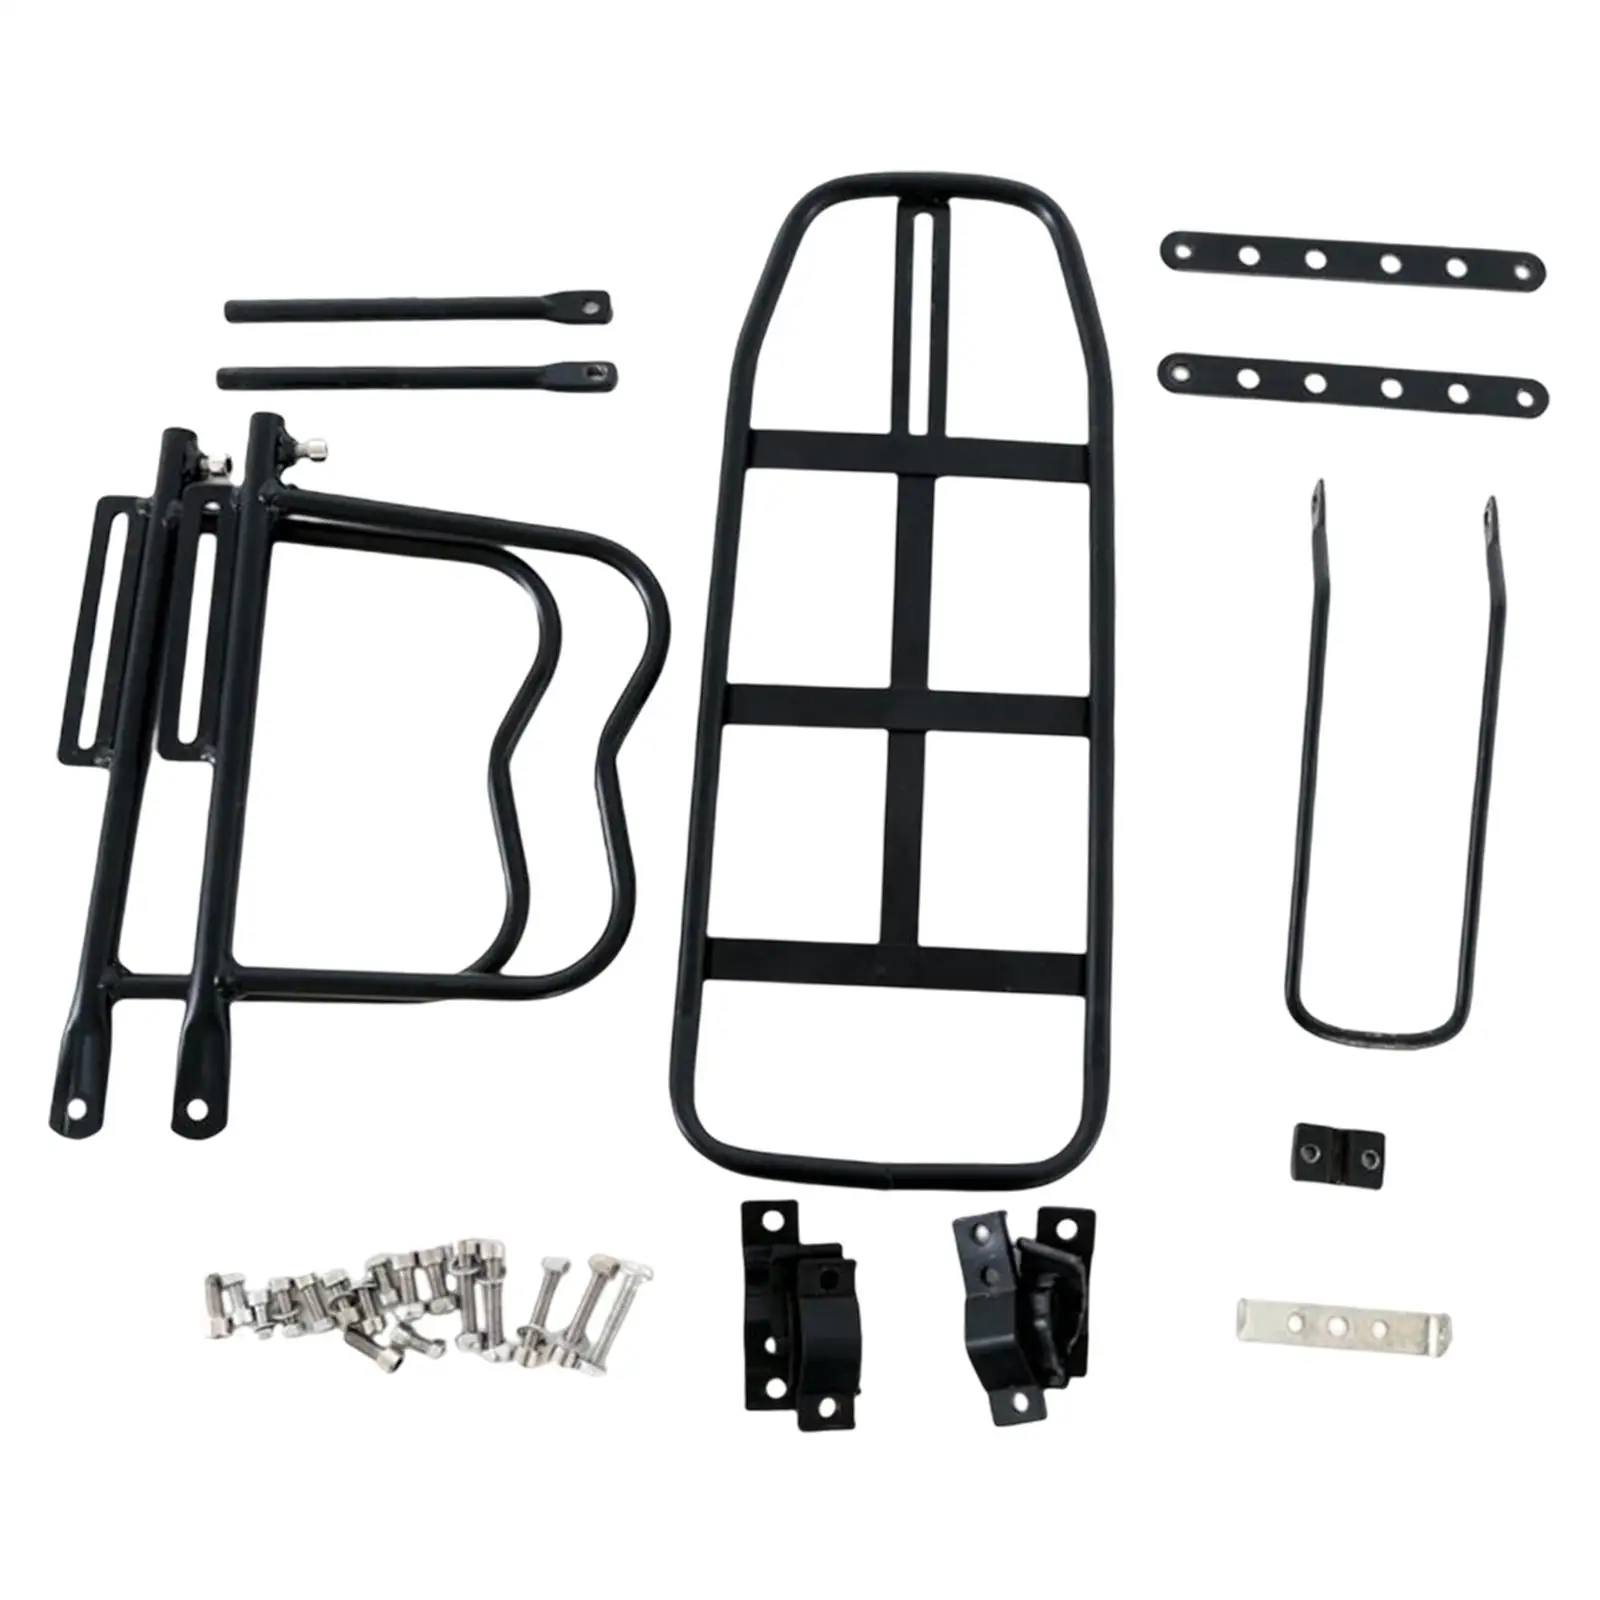 Mountain Bike Bike Rear Luggage Cargo Rack Easy Installation Accessories Back Seat Carrier Panniers Universal Shelf for